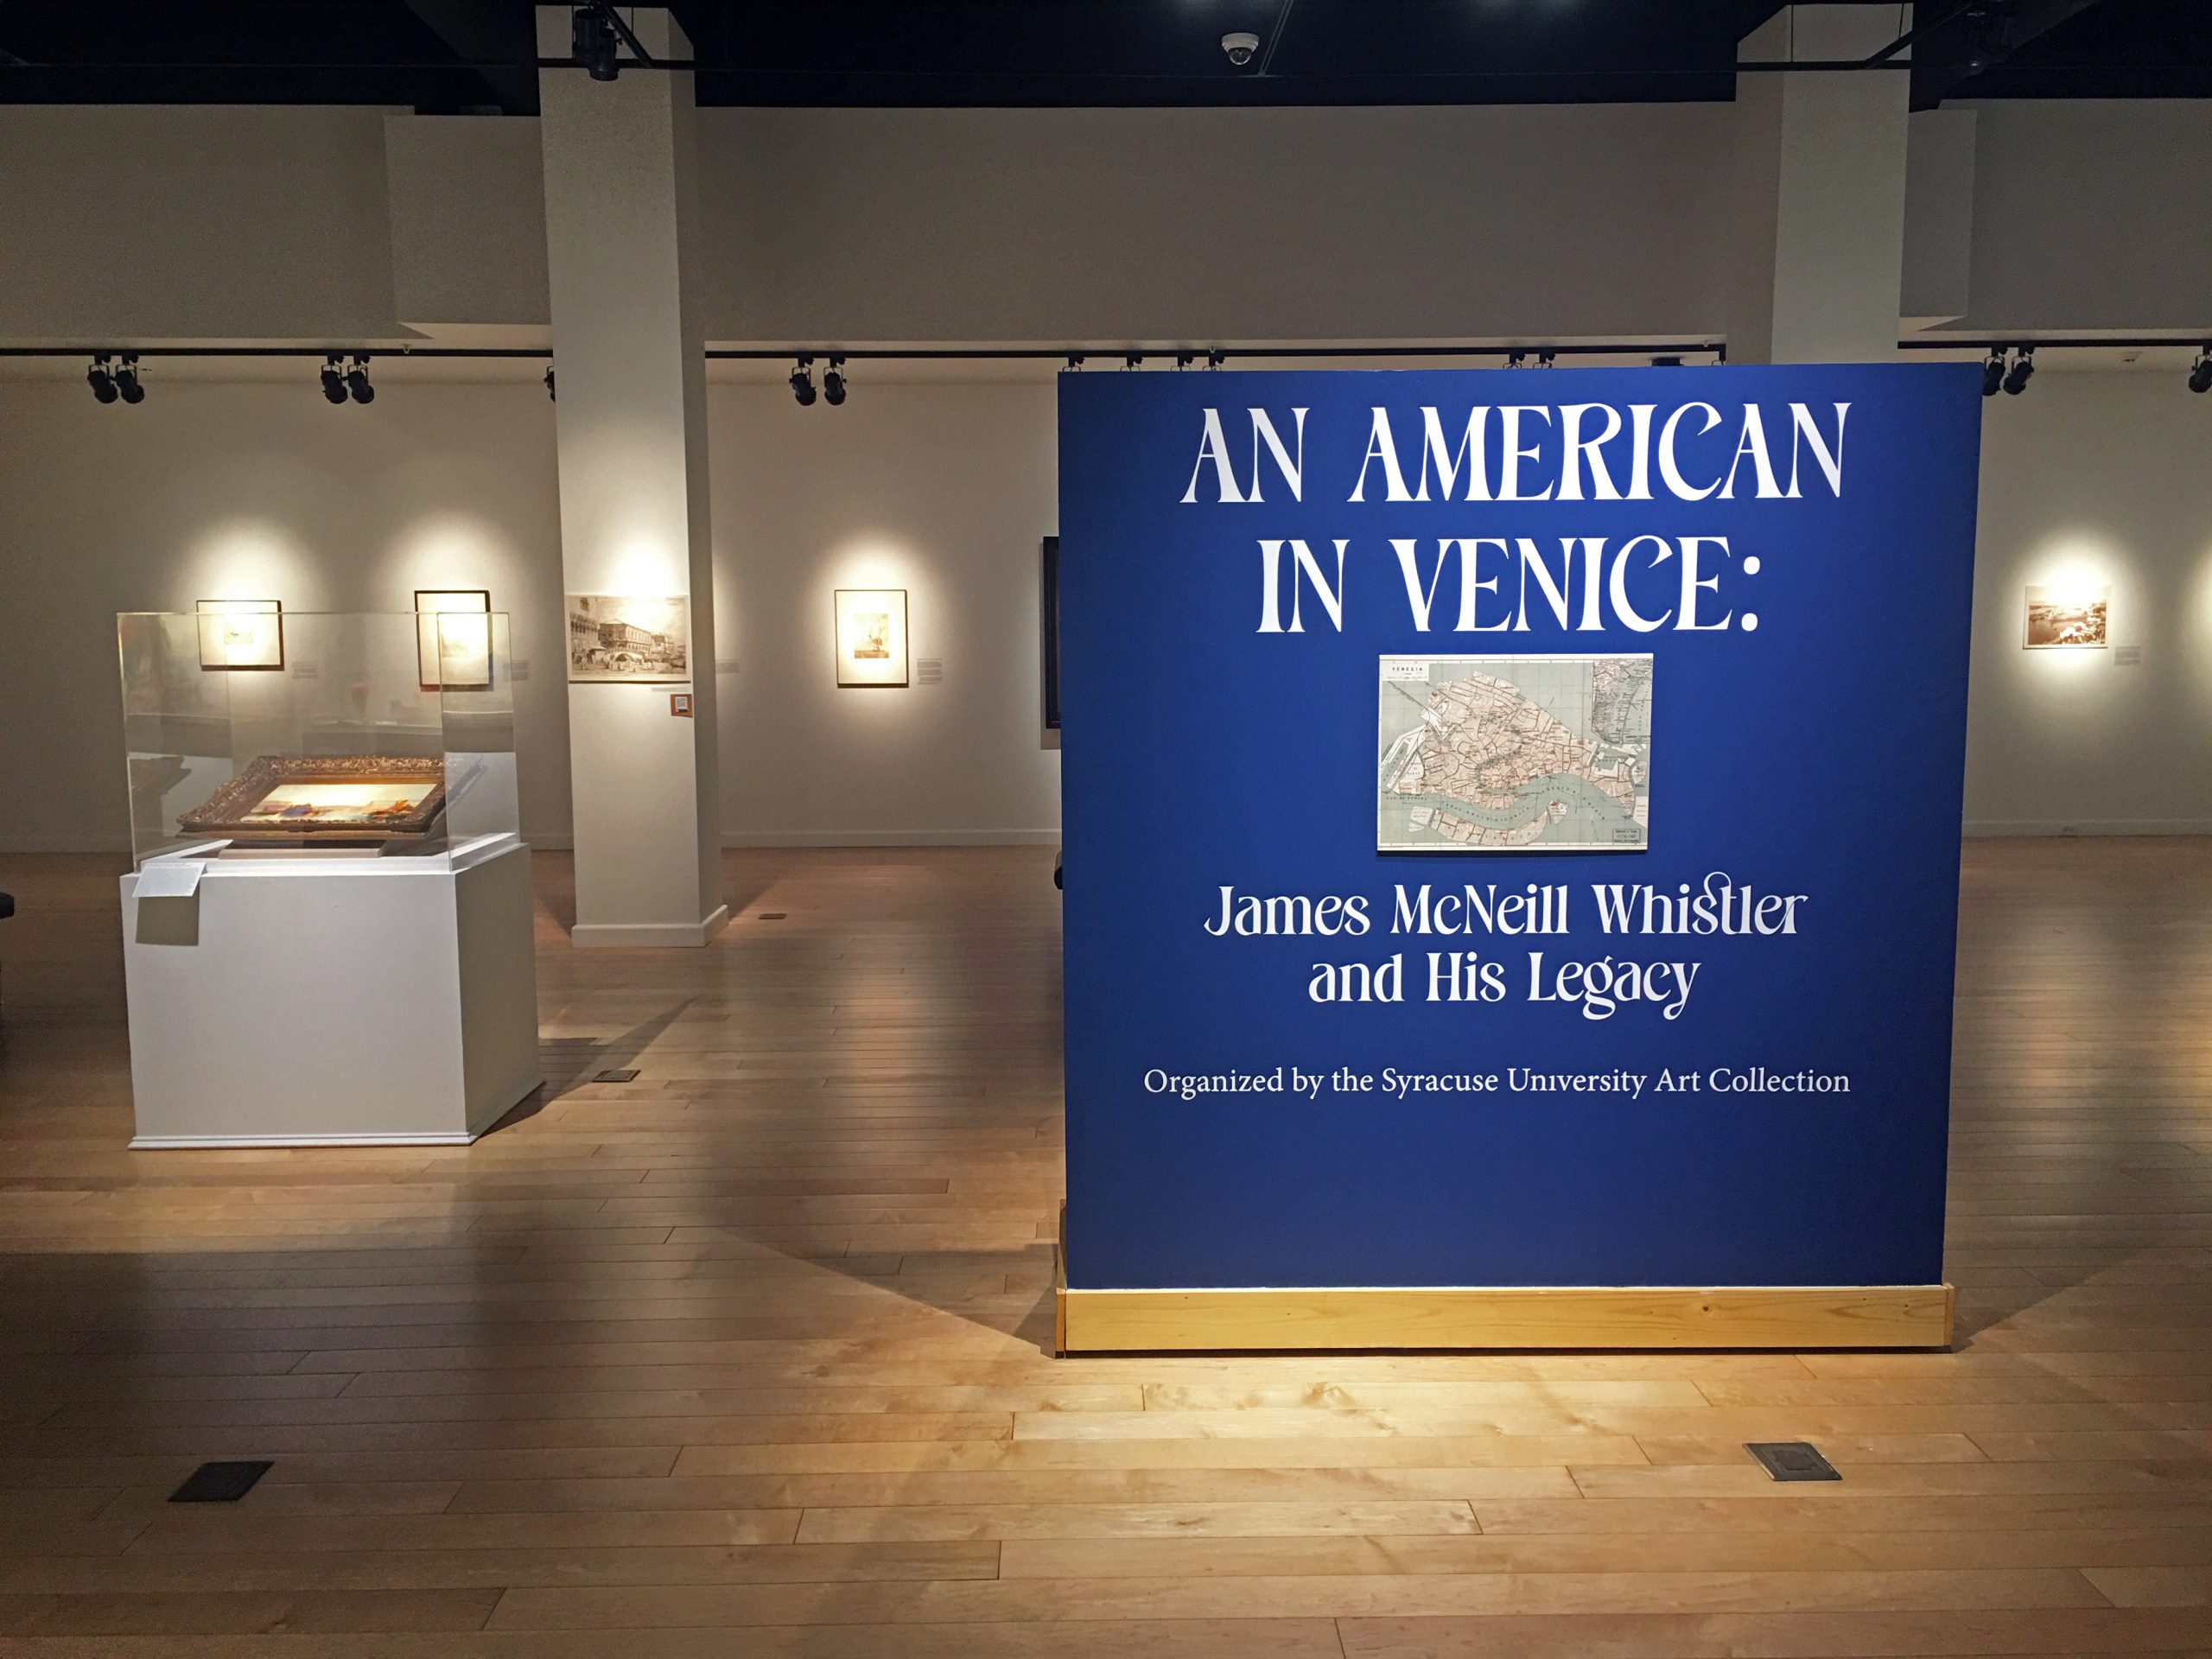 Interior view of Forsyth Galleries. Title wall is bright blue and features a map of Venice.